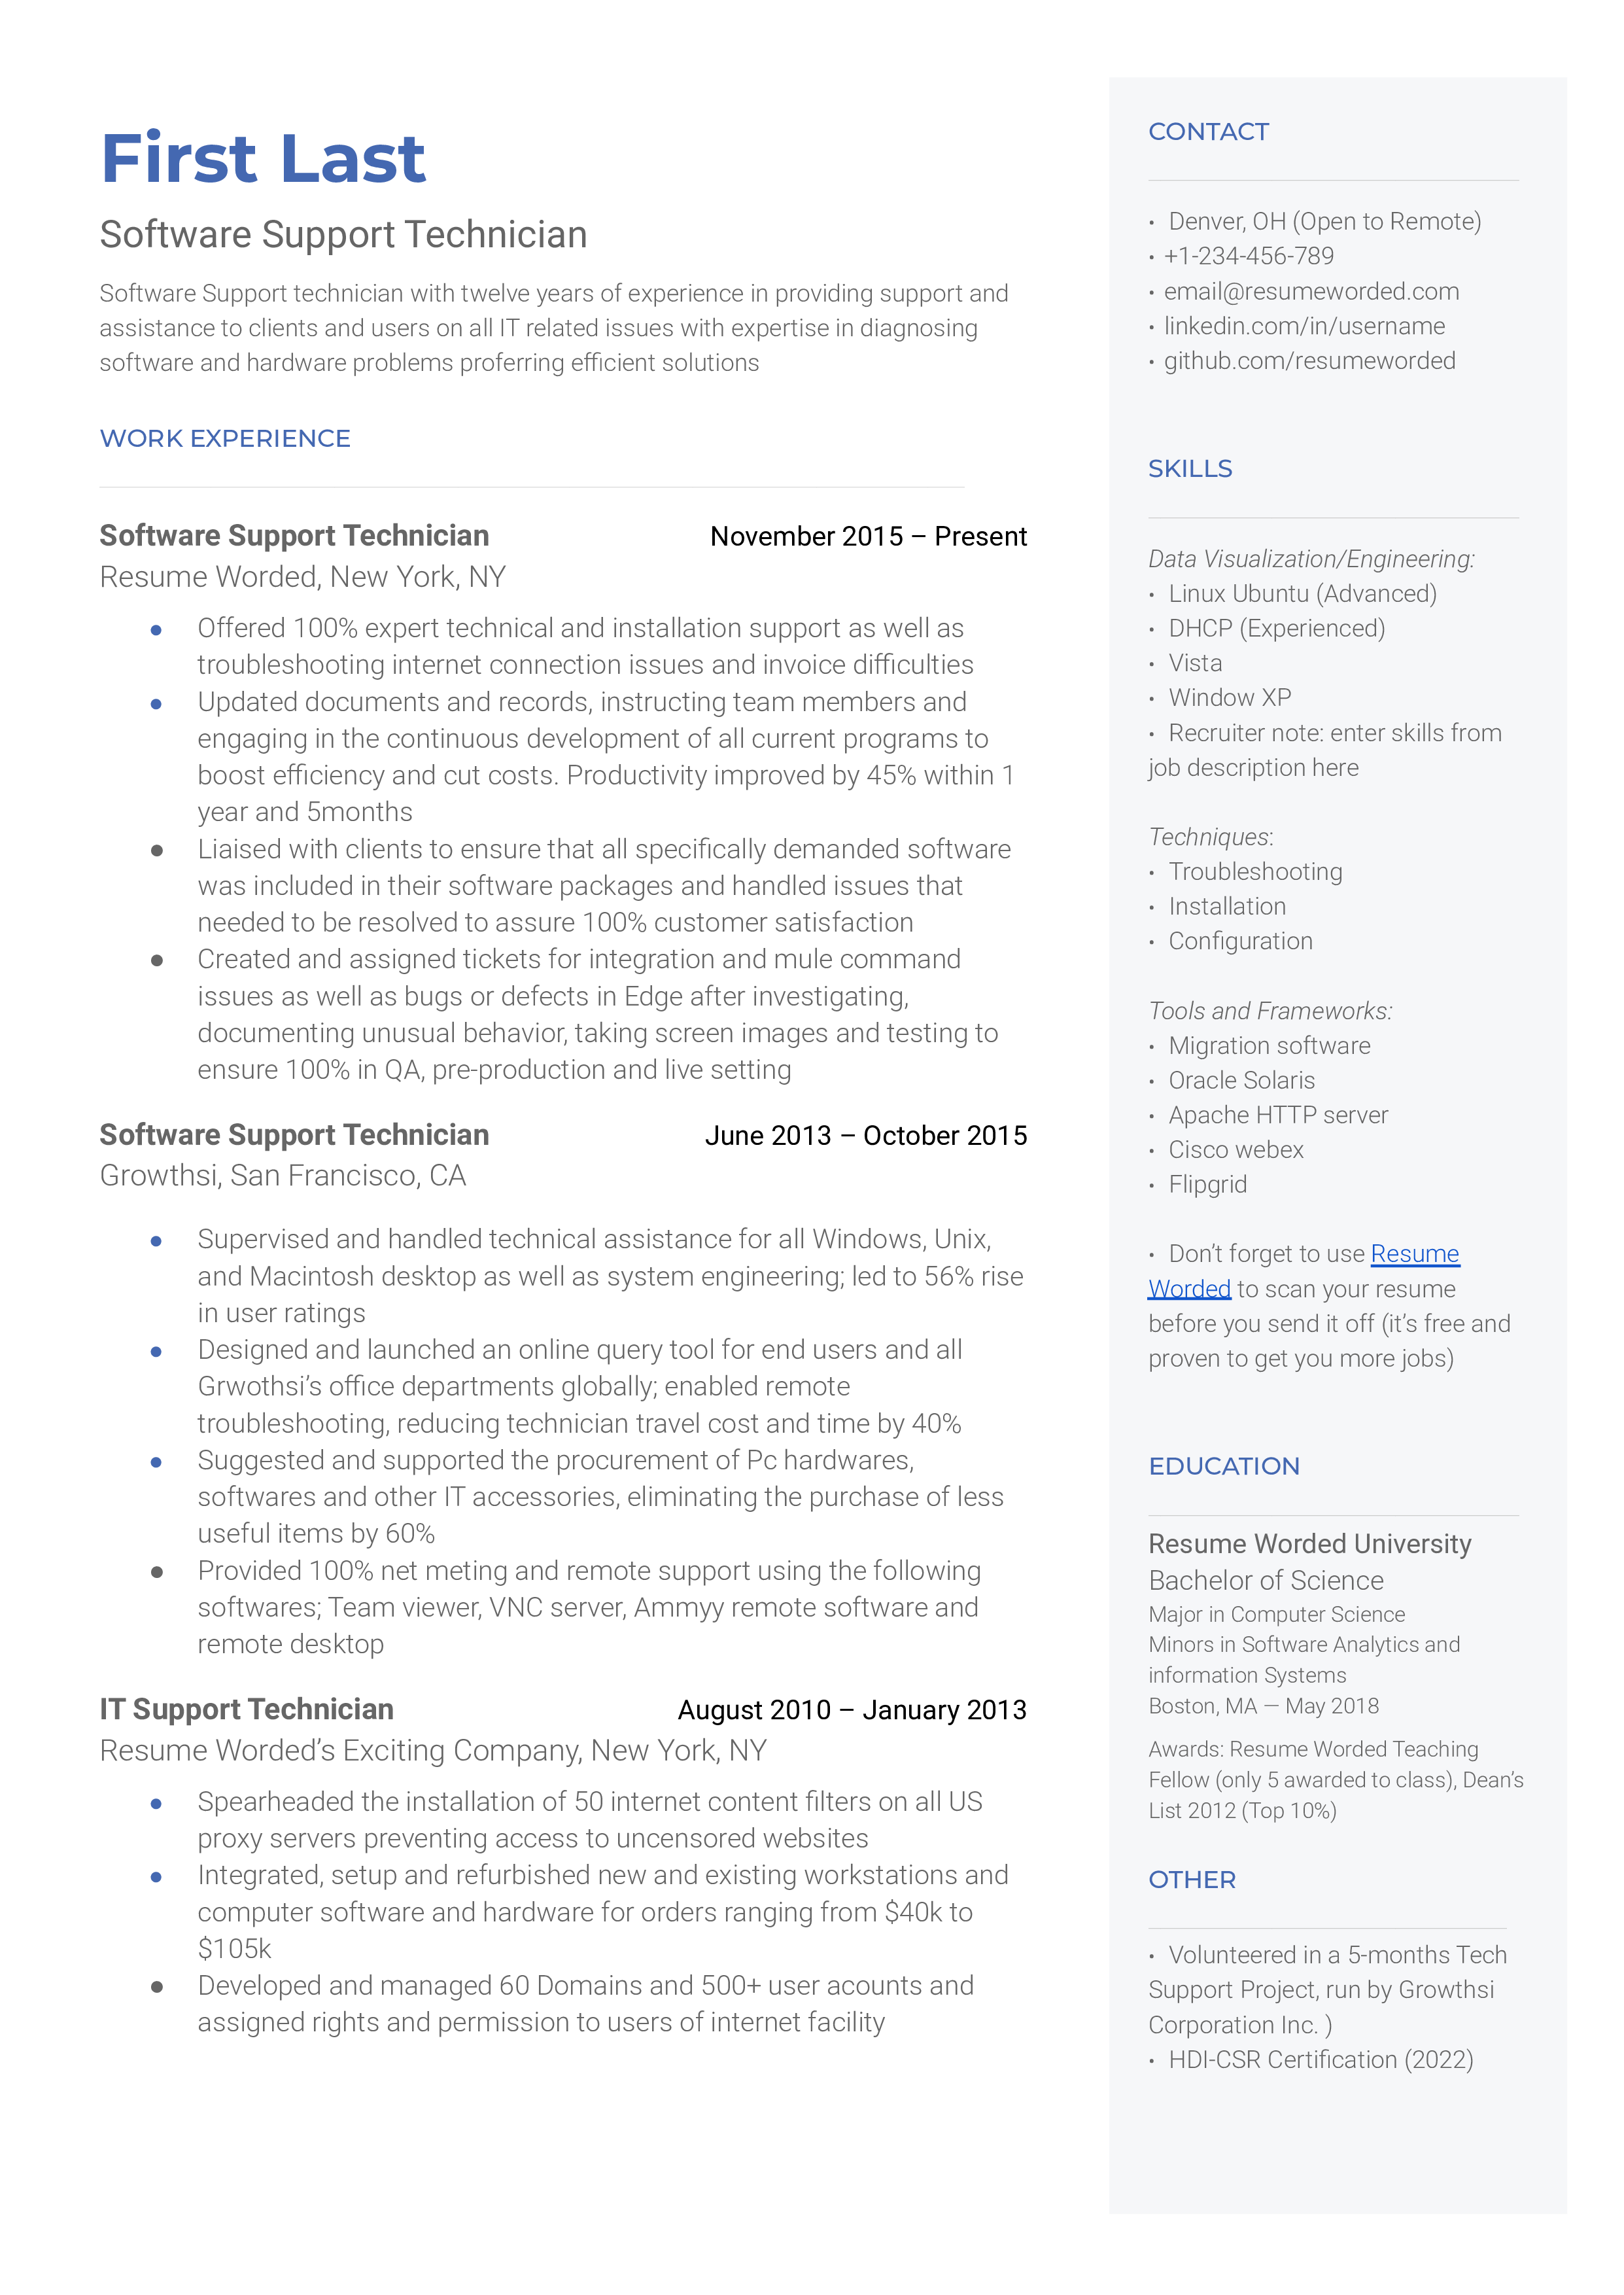 An exemplary Software Support Technician CV showcasing relevant skills and experiences.